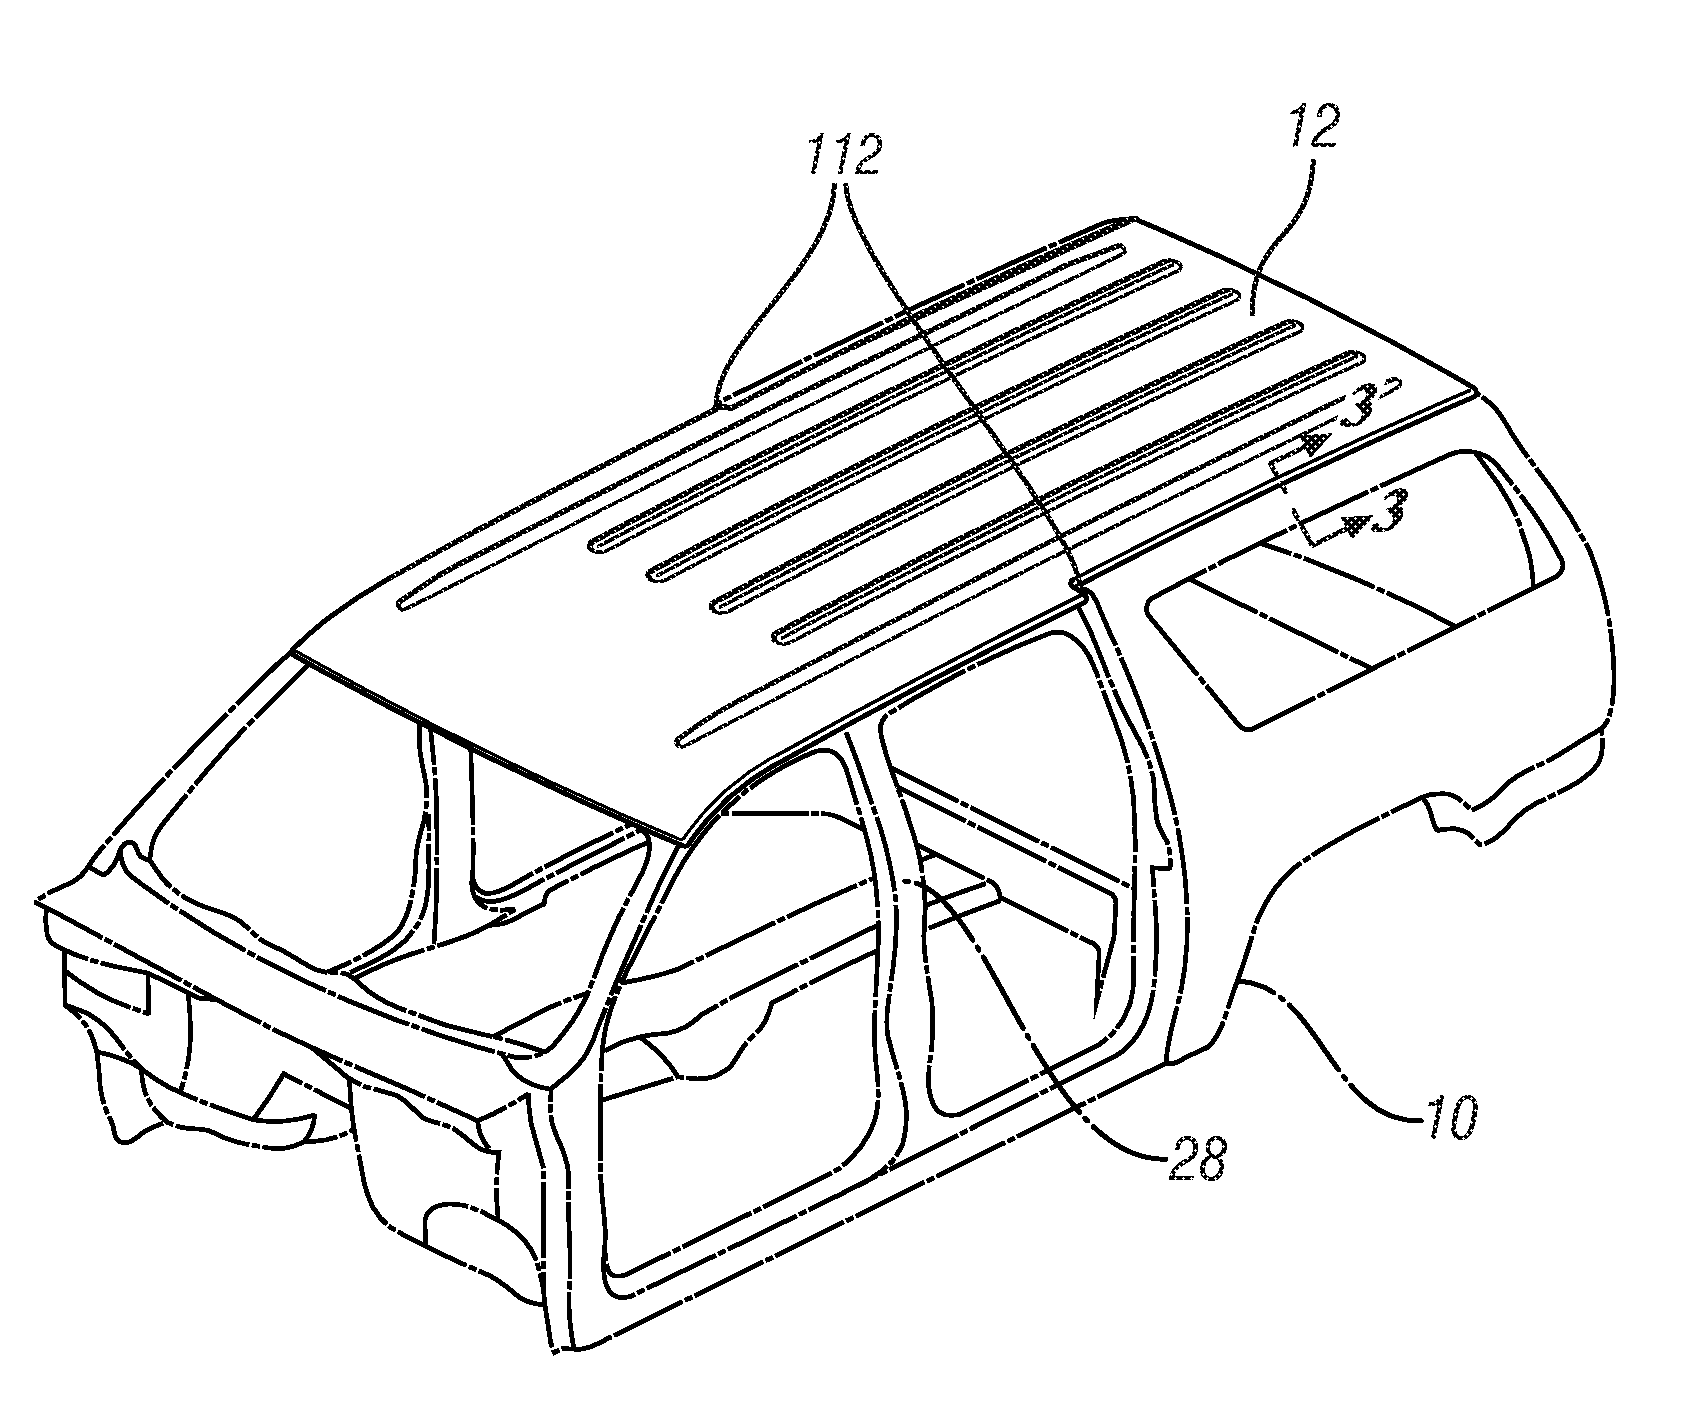 Aluminum roof panel for attachment to supporting steel vehicle body members